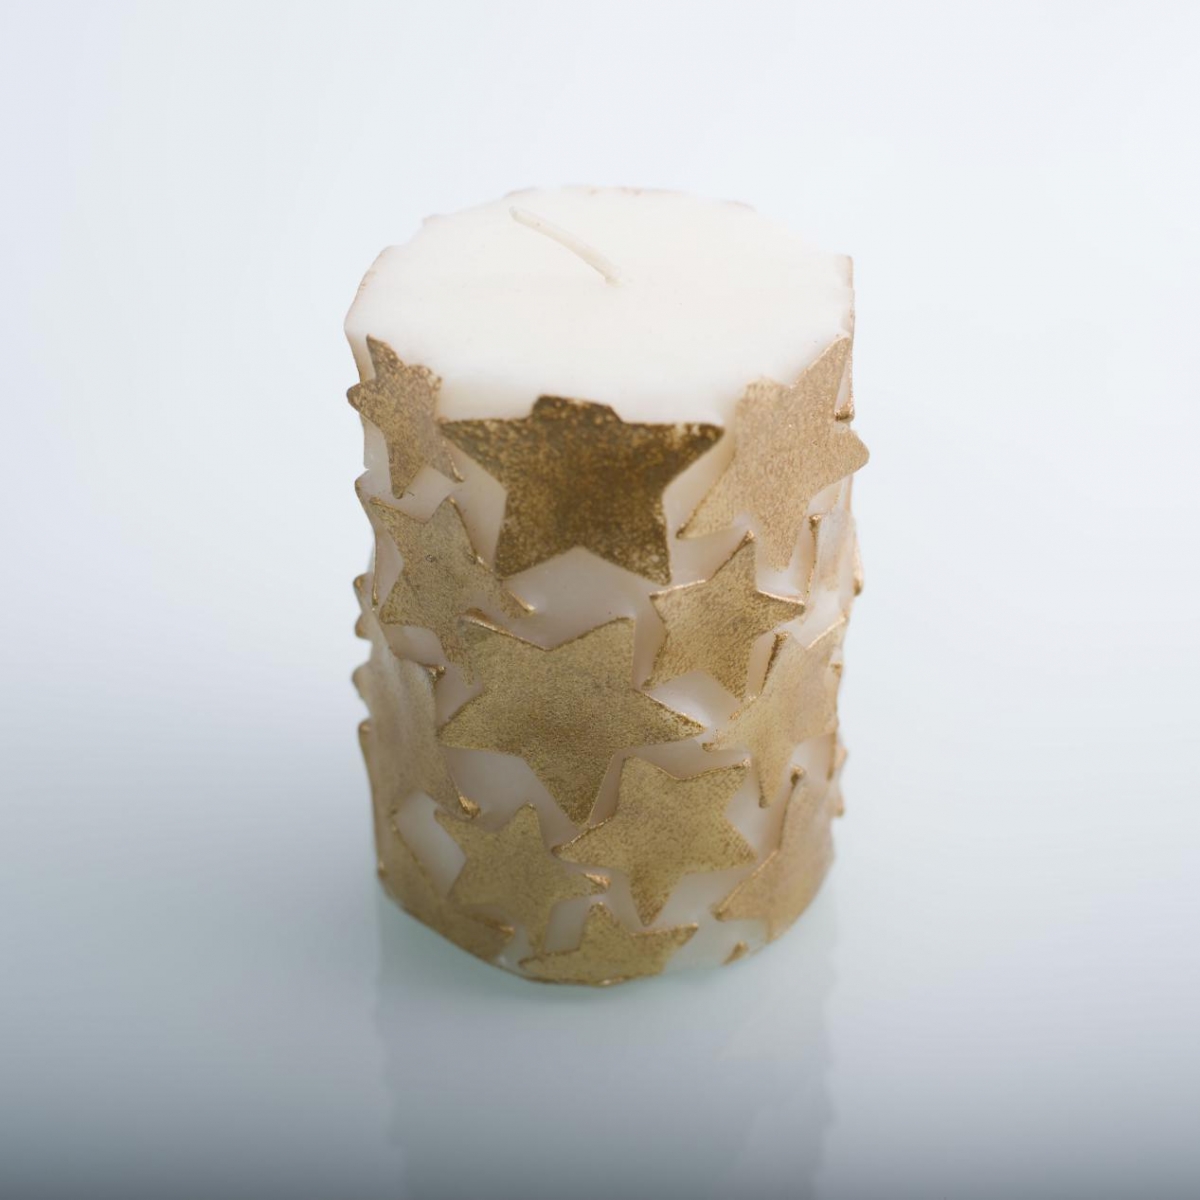 Pillar Candles： Gold Color, Embossed Stars, Galaxy Star, China Factory, Best Price-HOWCANDLE-Candles,Scented Candles,Aromatherapy Candles,Soy Candles,Vegan Candles,Jar Candles,Pillar Candles,Candle Gift Sets,Essential Oils,Reed Diffuser,Candle Holder,